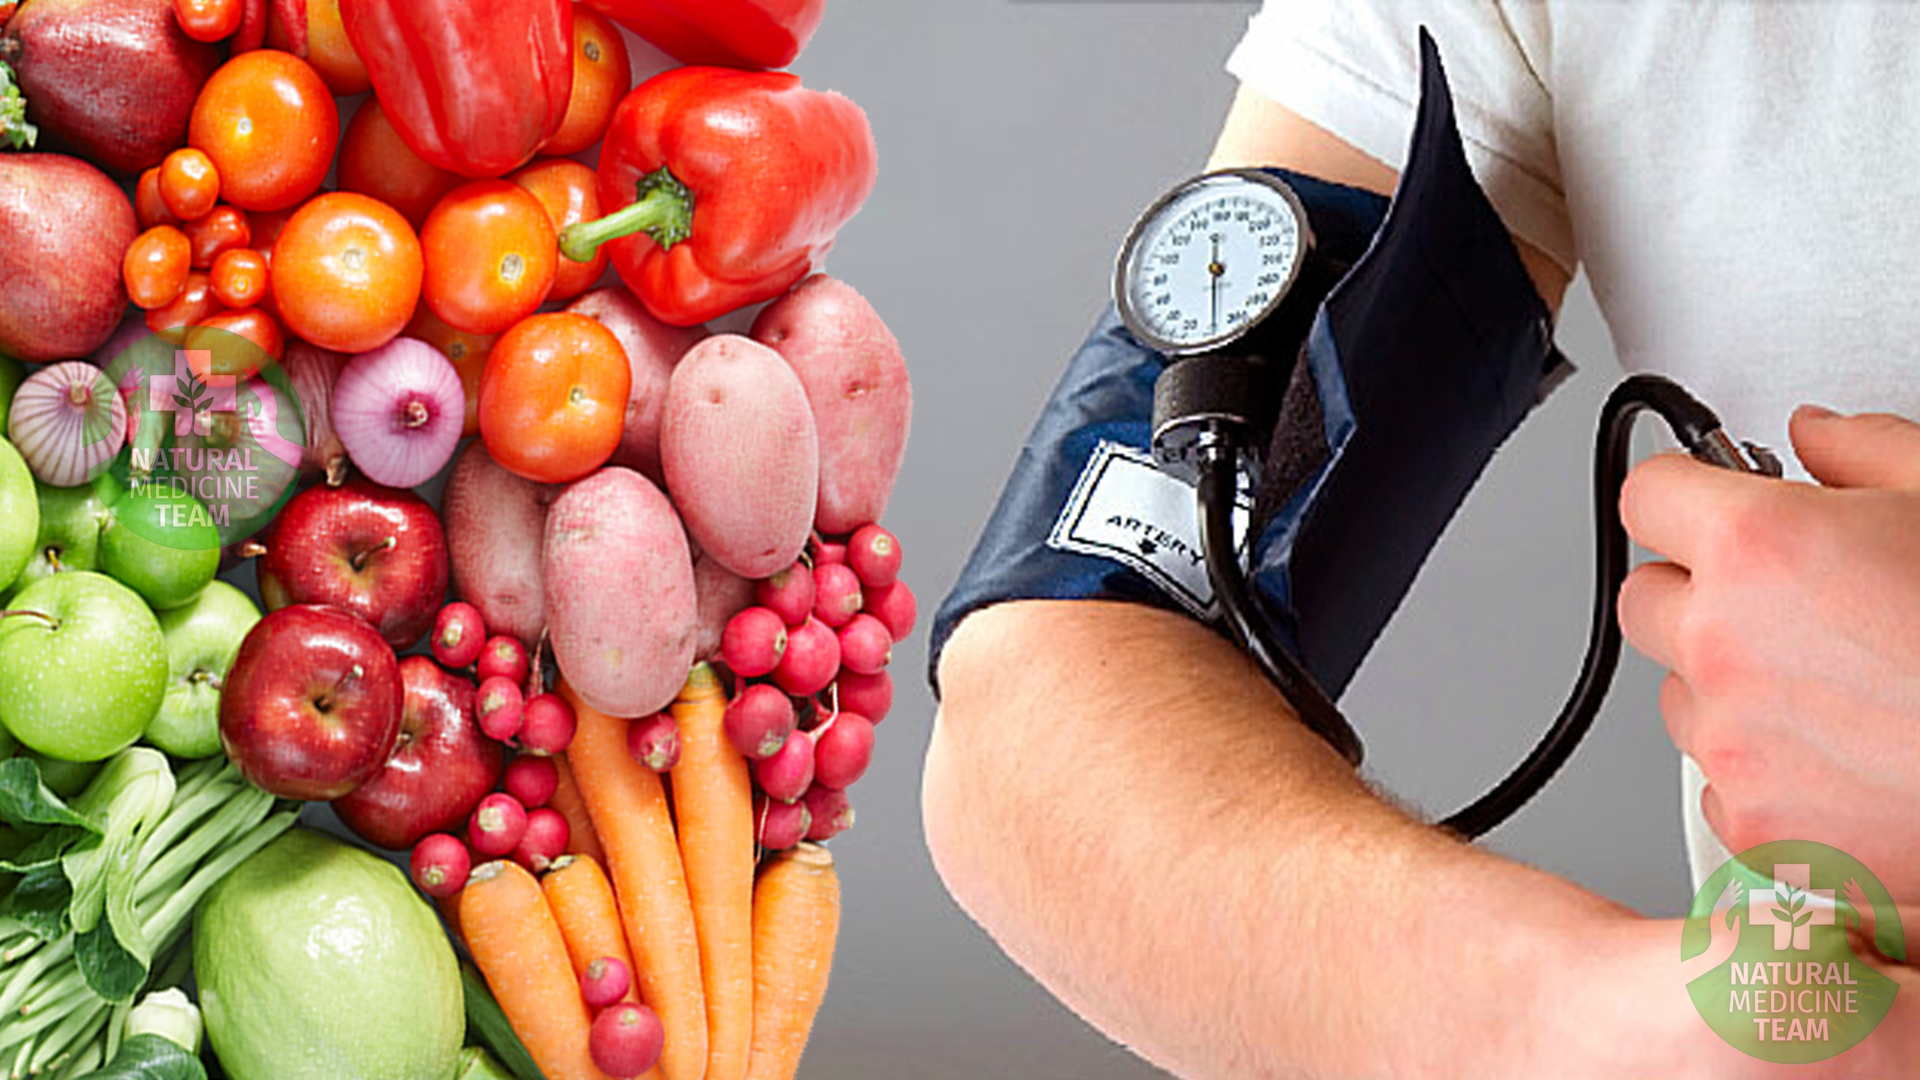 Top 8 Home Remedies That Can Help You Lower Your Blood Pressure